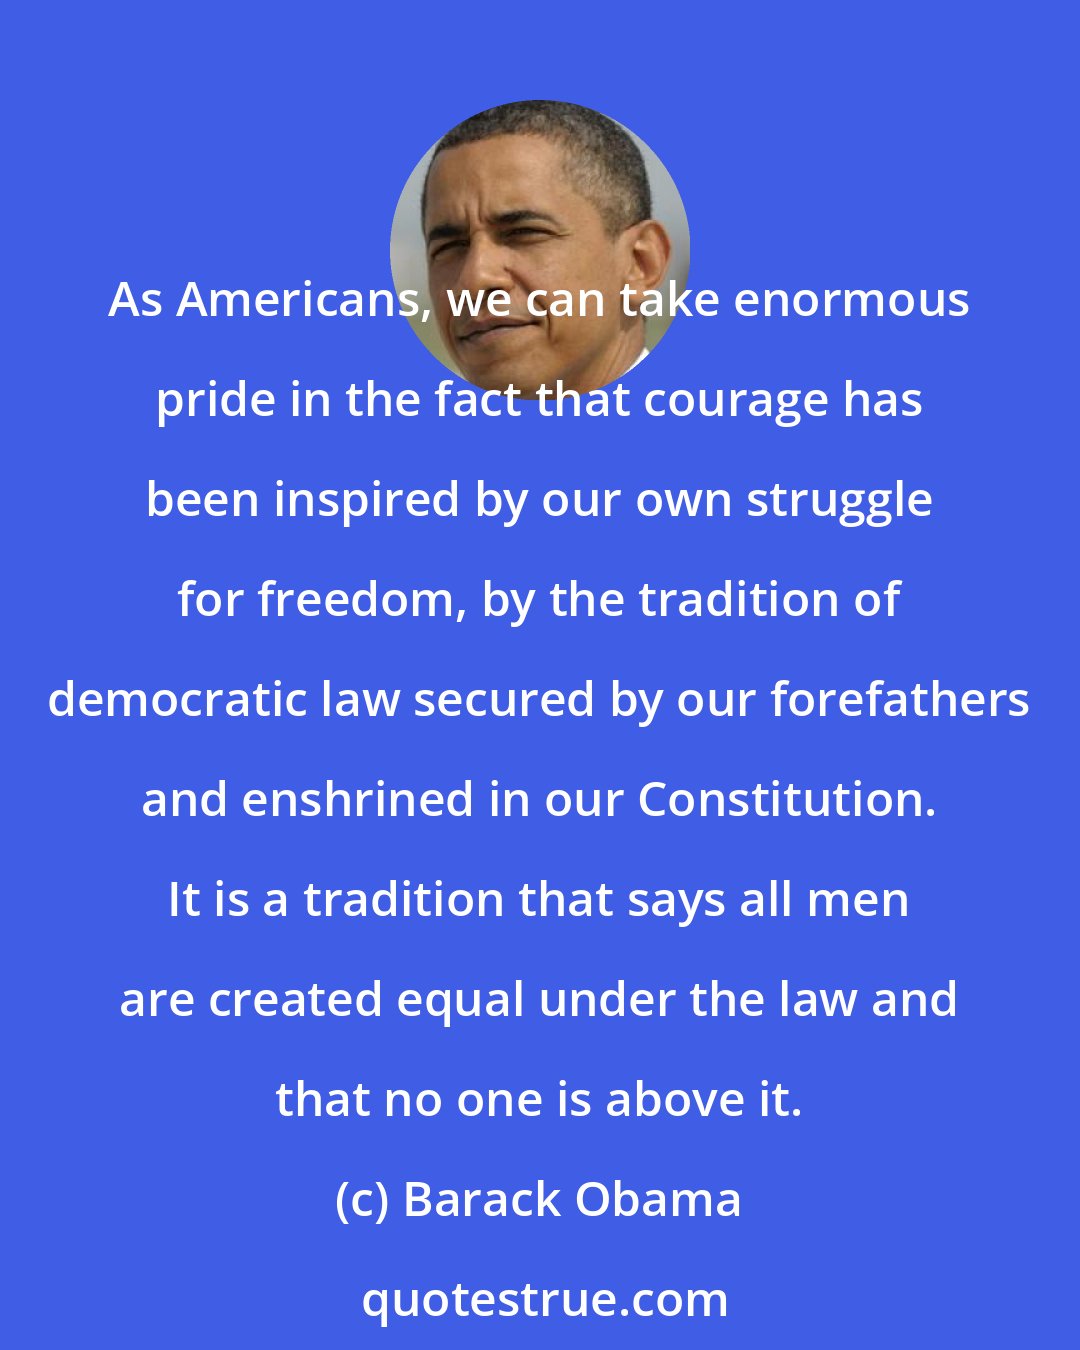 Barack Obama: As Americans, we can take enormous pride in the fact that courage has been inspired by our own struggle for freedom, by the tradition of democratic law secured by our forefathers and enshrined in our Constitution. It is a tradition that says all men are created equal under the law and that no one is above it.